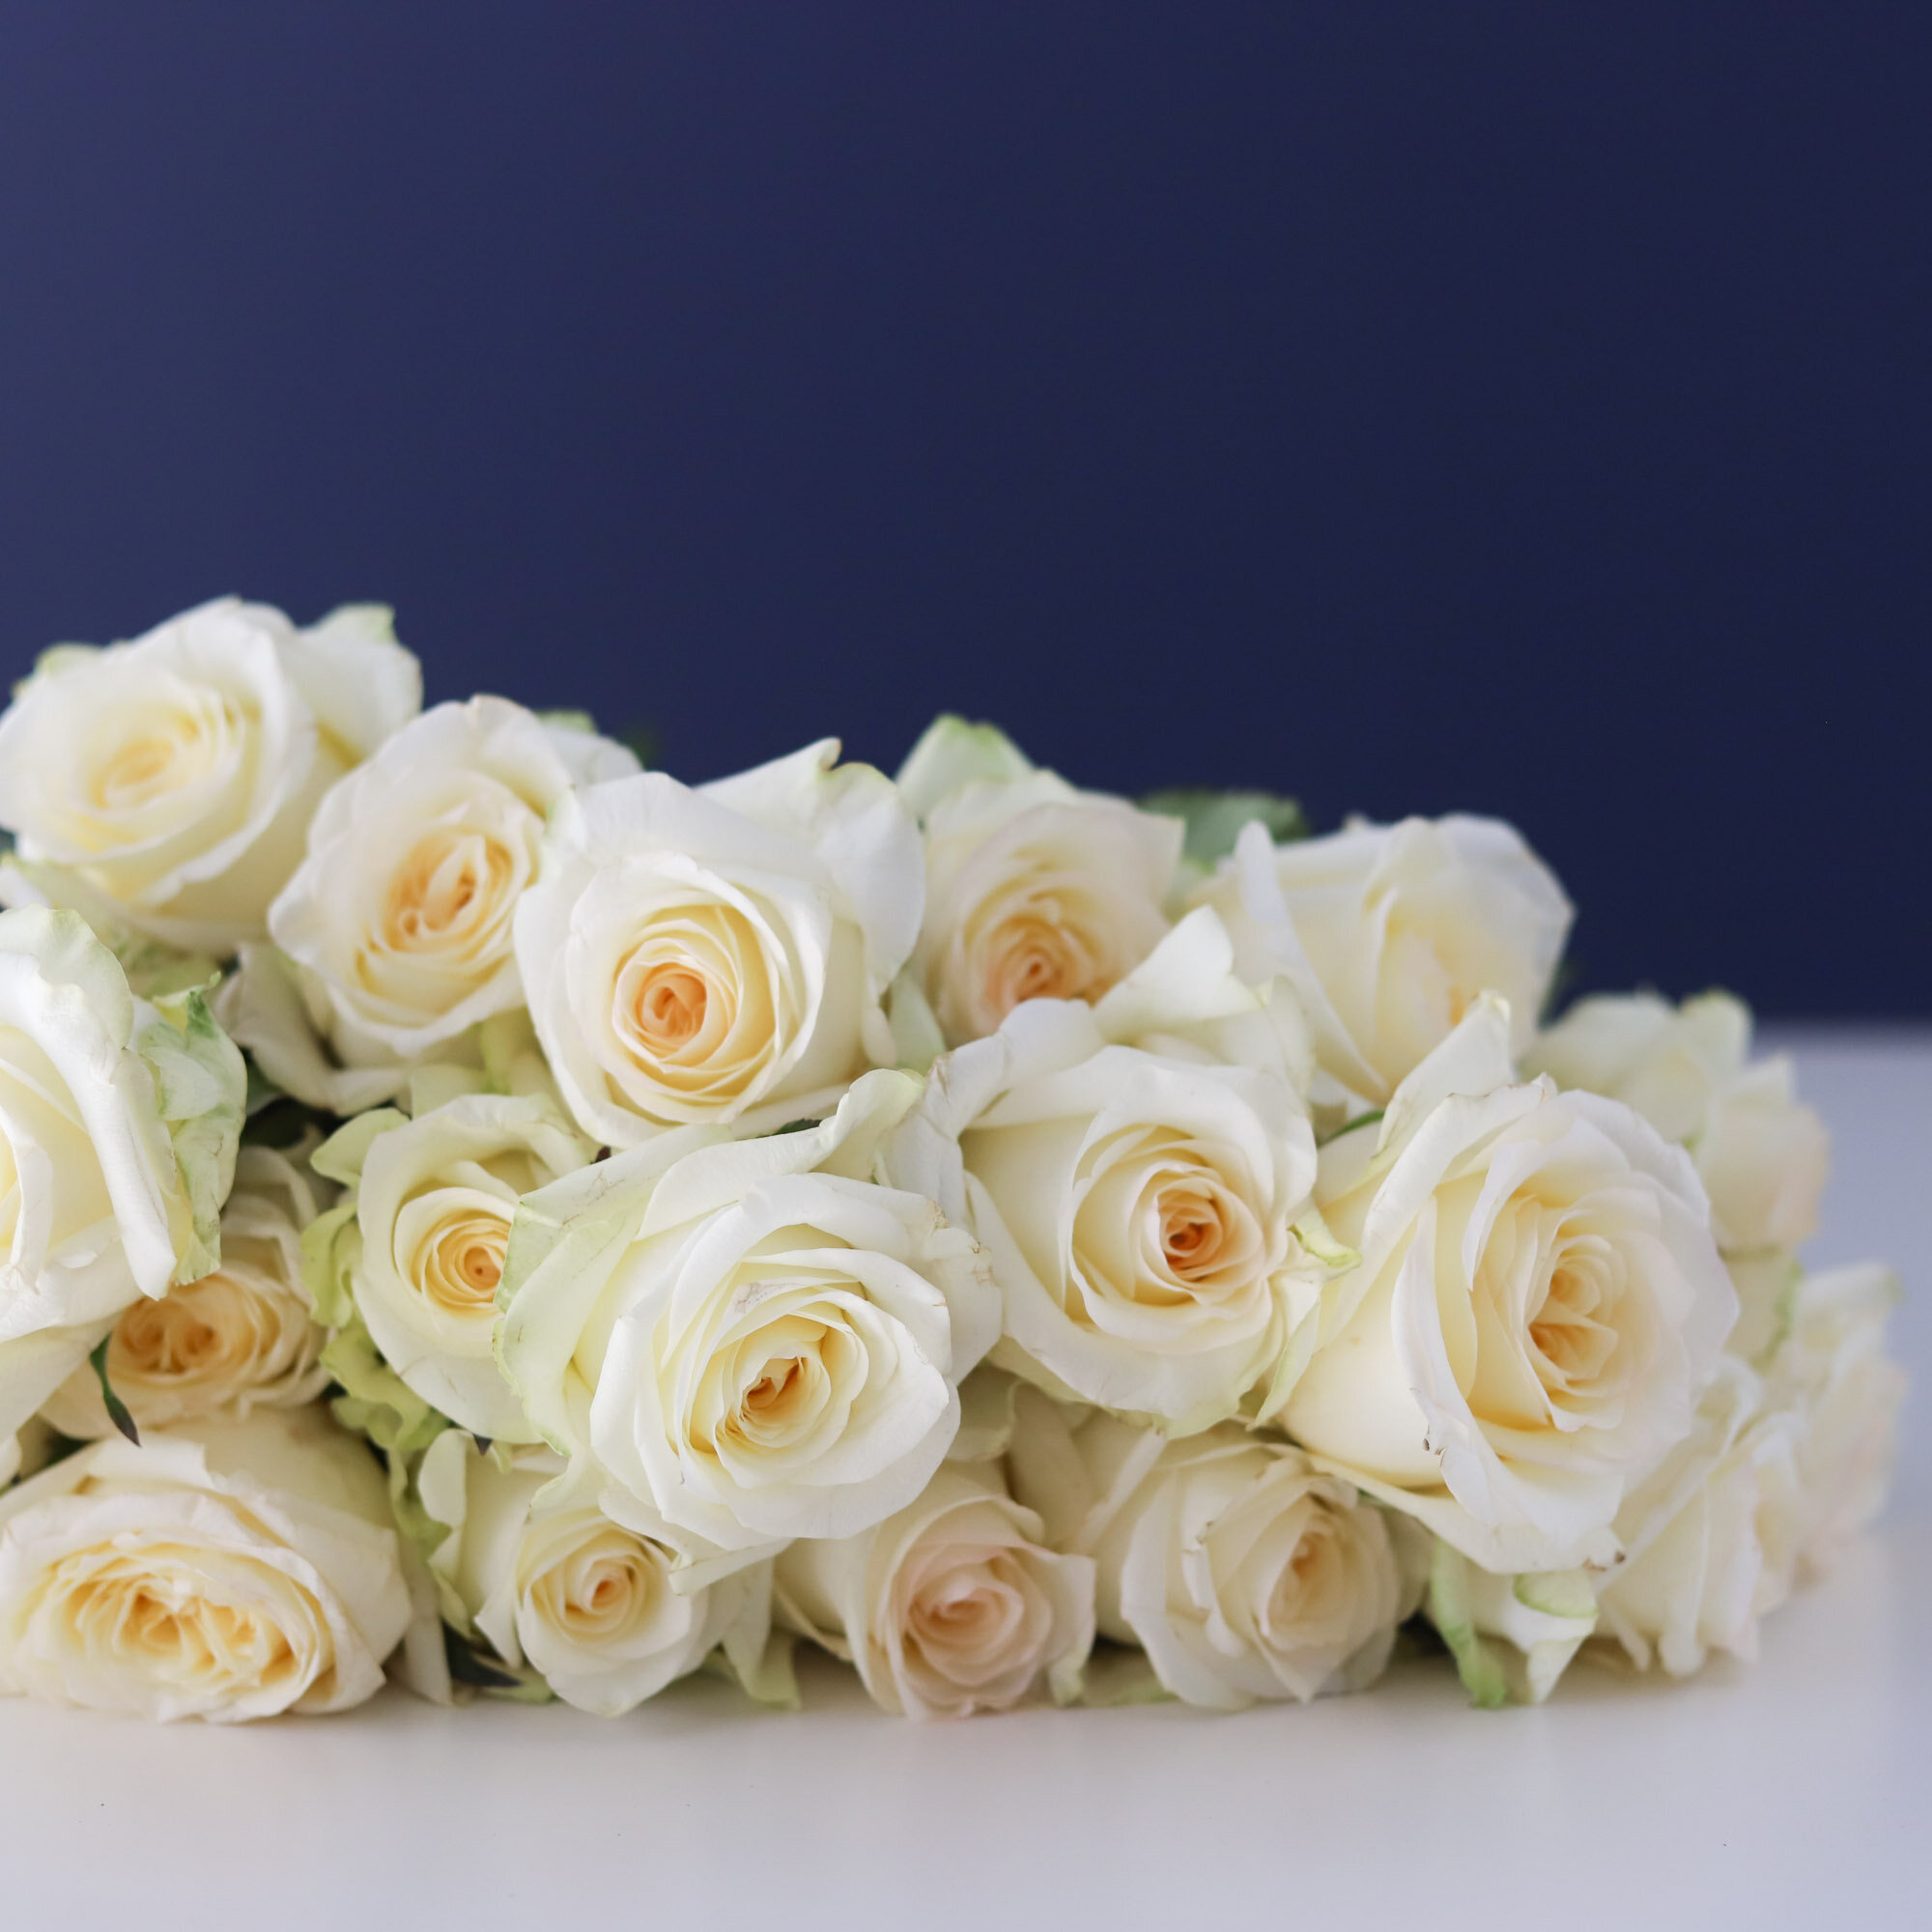 A close up of several white roses laying on a table with a navy background